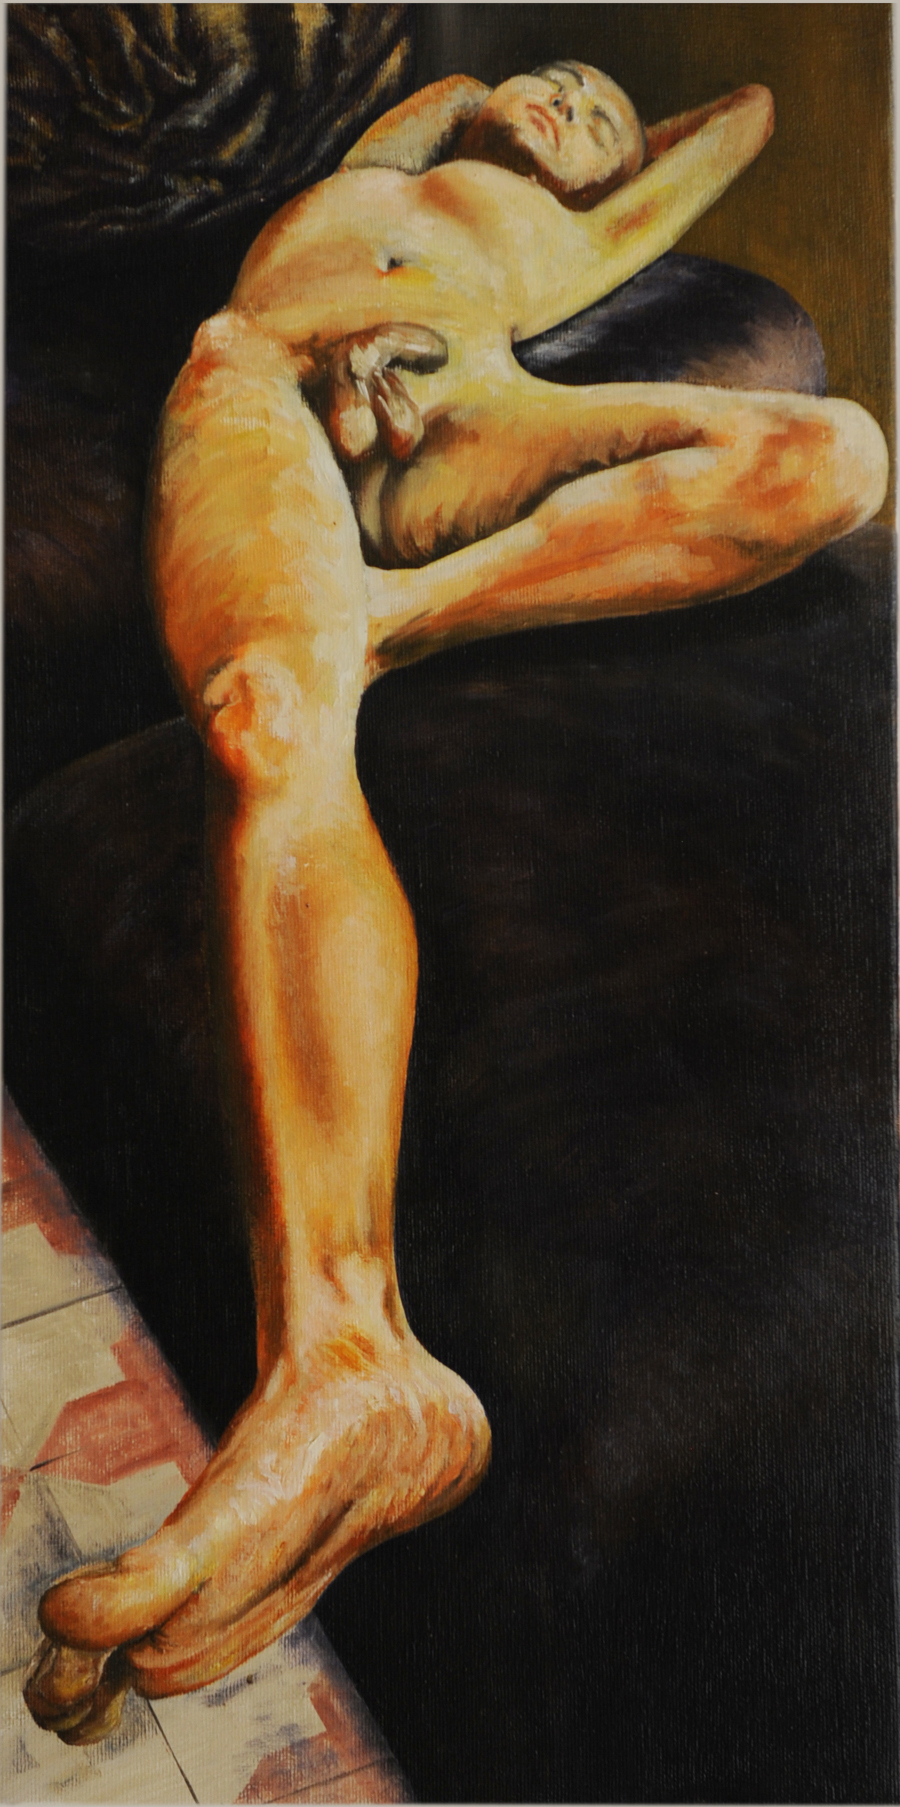 Oil painting of a young naked man, golden complexion, lying on a leather couch, seen from an extreme angle near his foot. The yellows and reds of his musculature contrast with the couch’s dark tones.